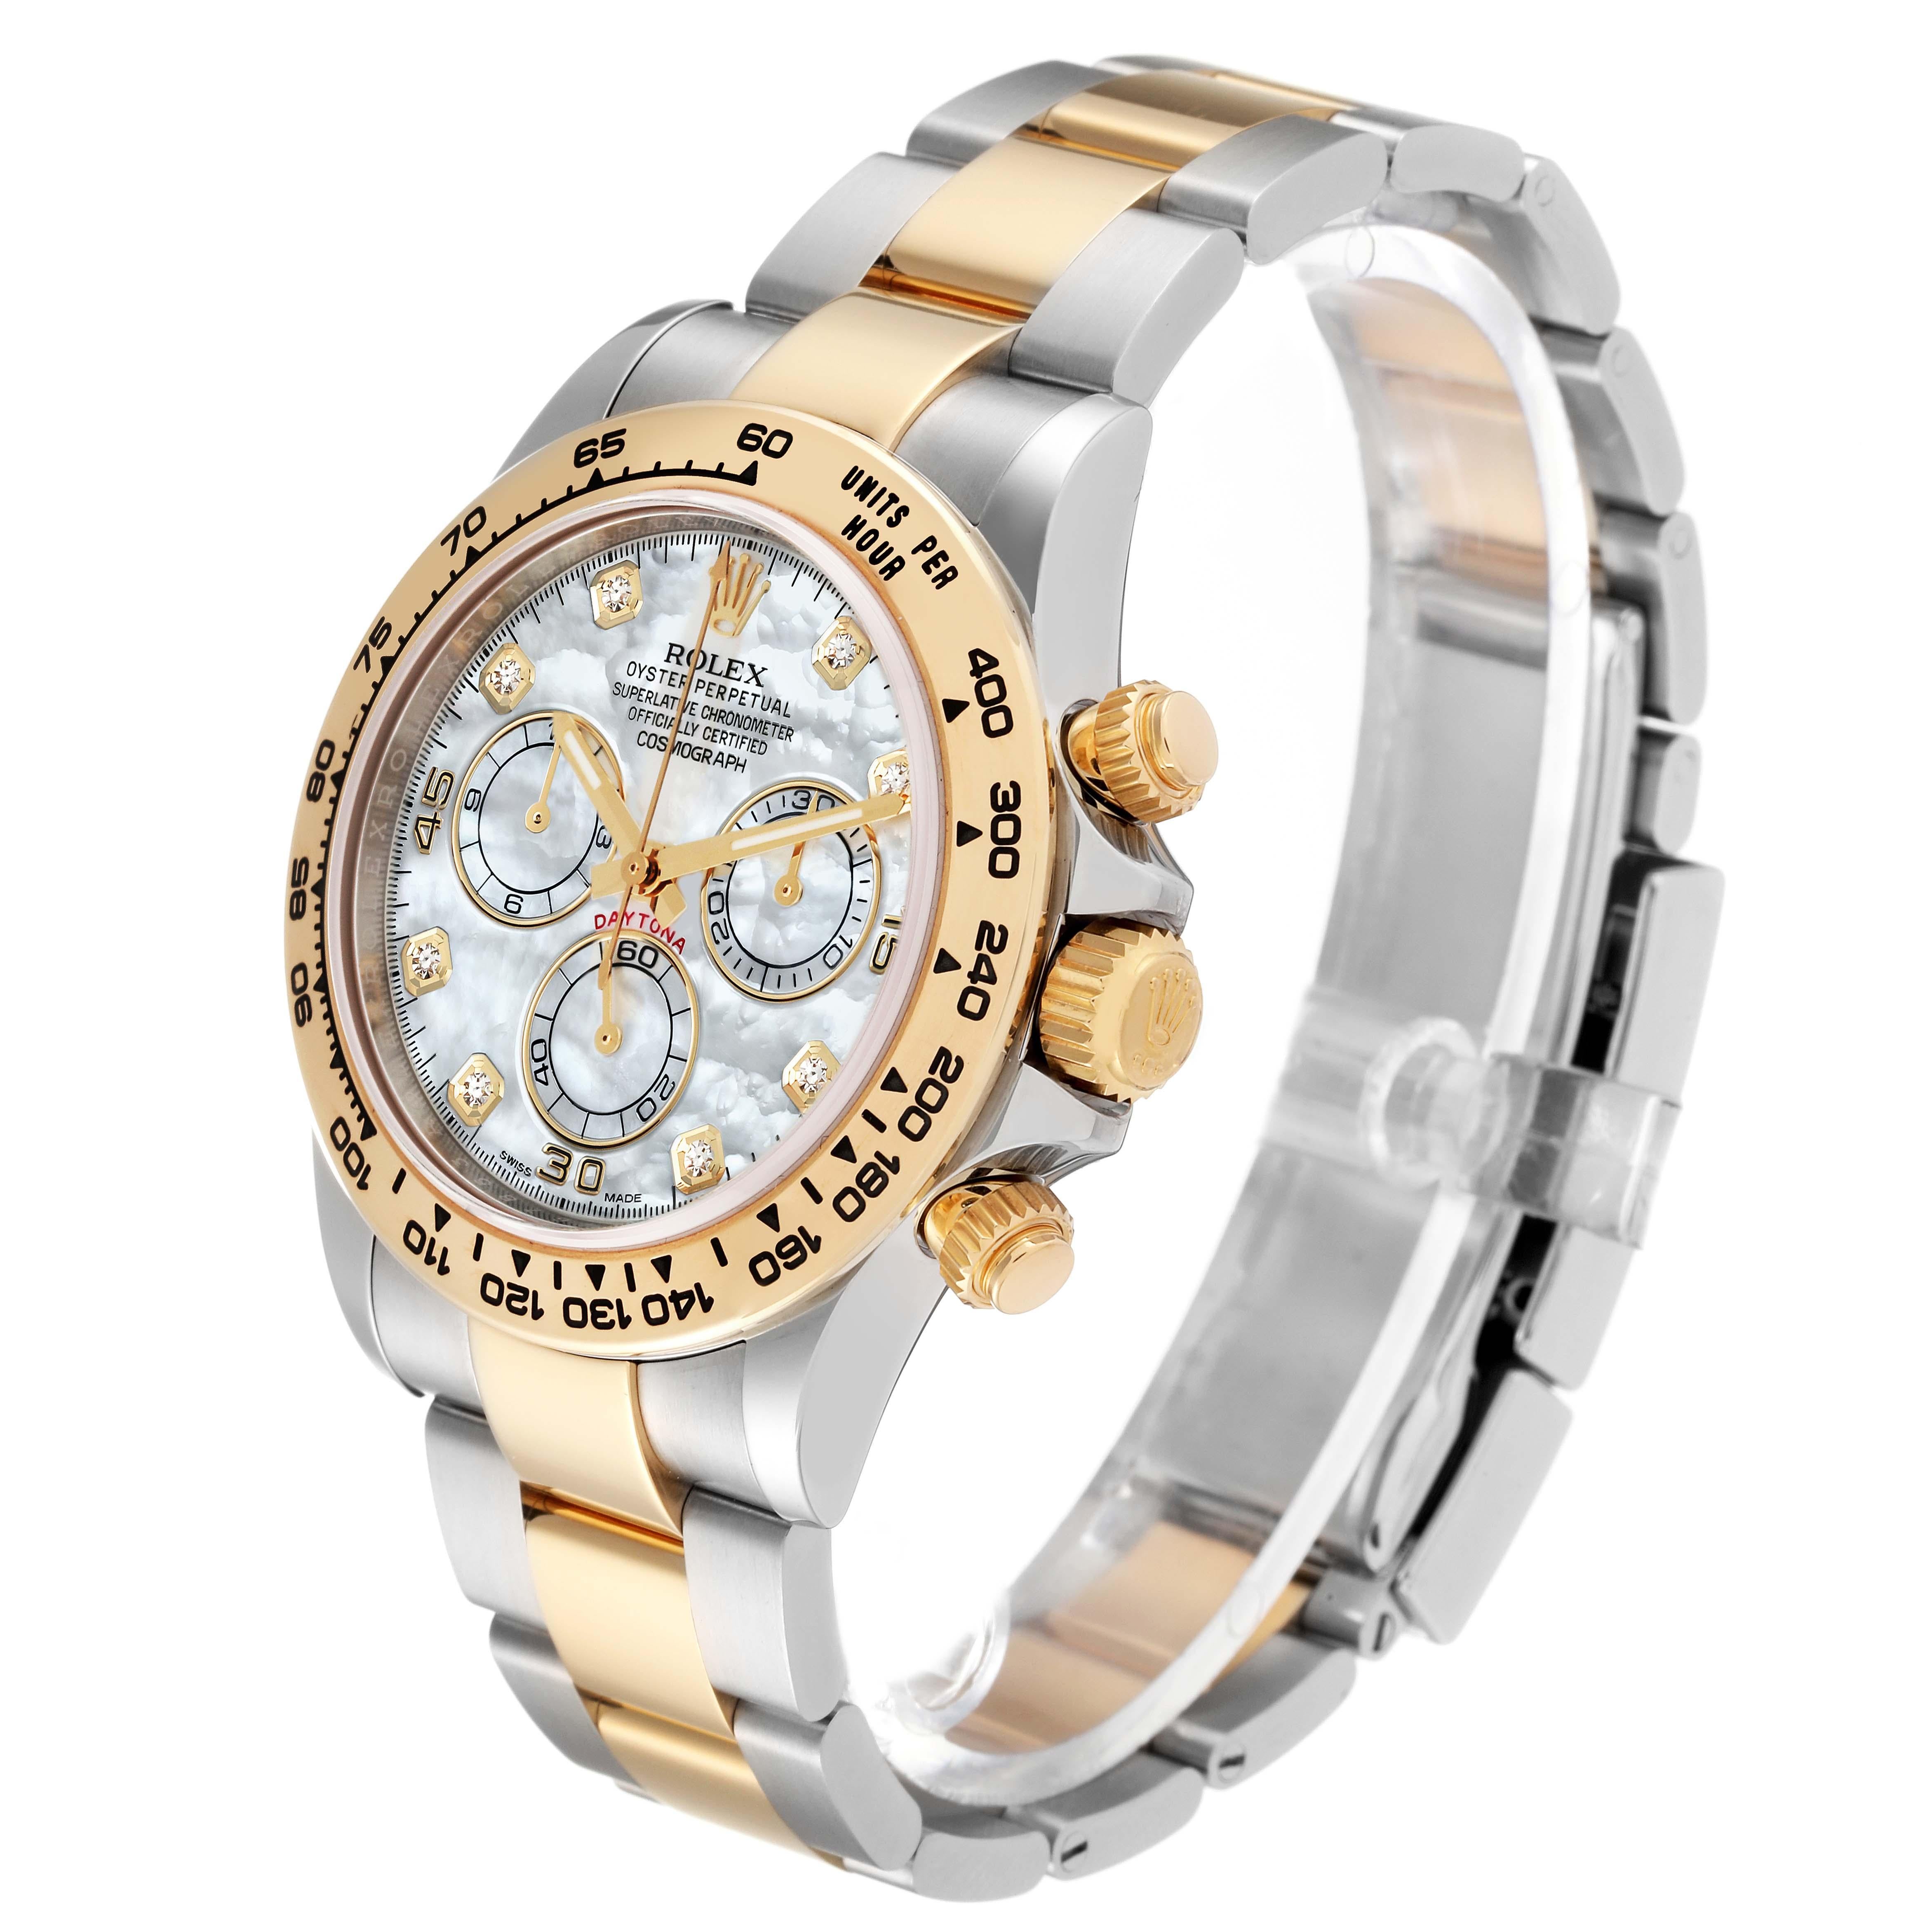 Rolex Daytona Steel Yellow Gold Mother Of Pearl Diamond Mens Watch 116503 In Excellent Condition For Sale In Atlanta, GA